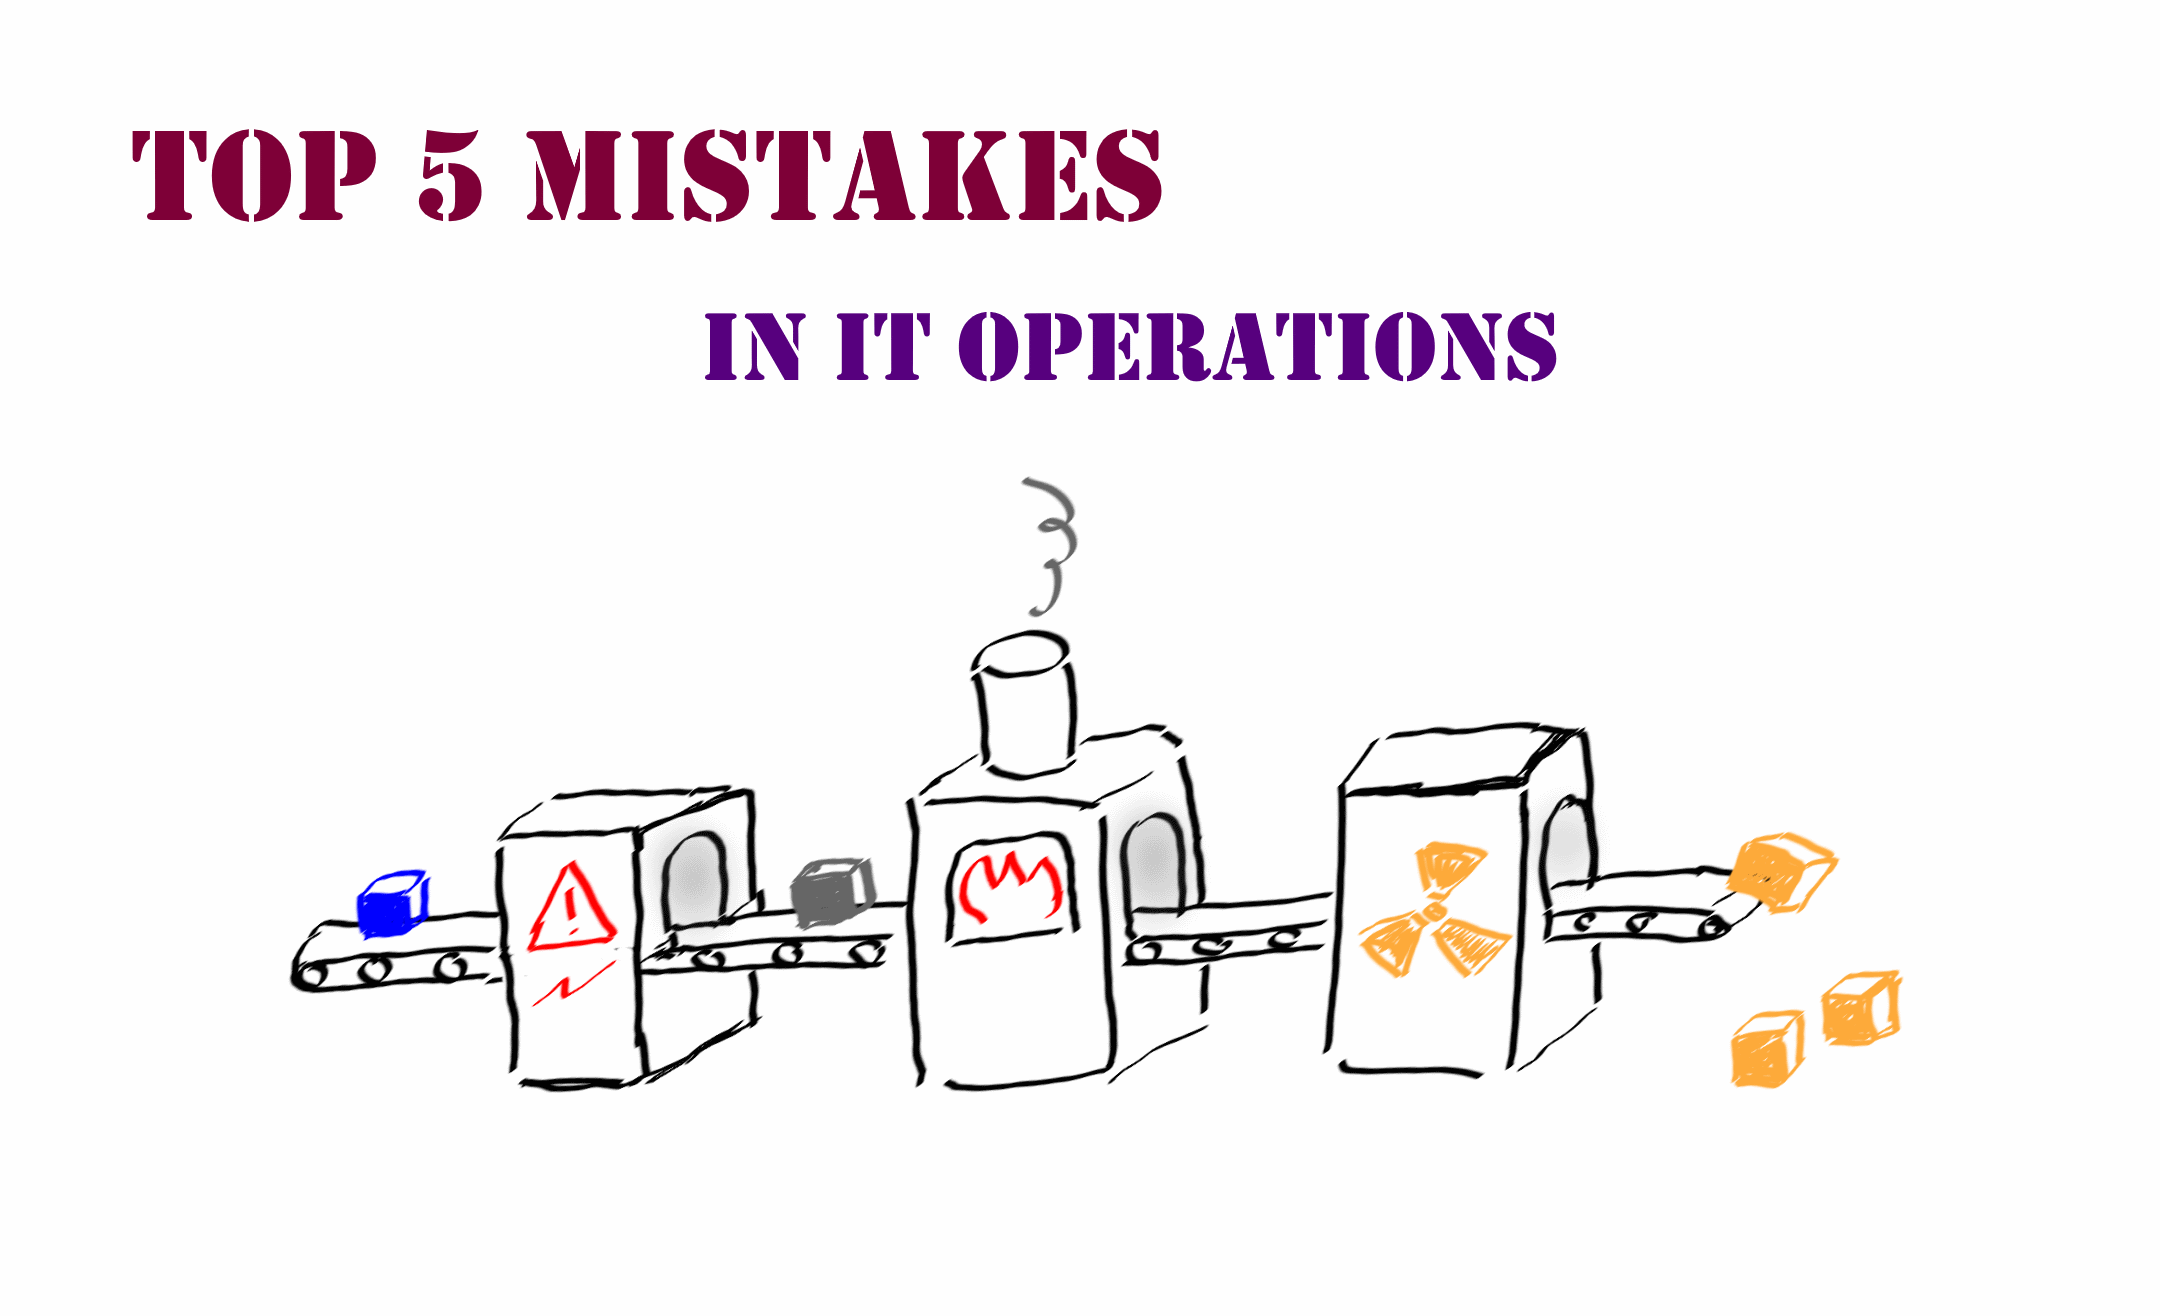 Top-5 mistakes in IT Operations